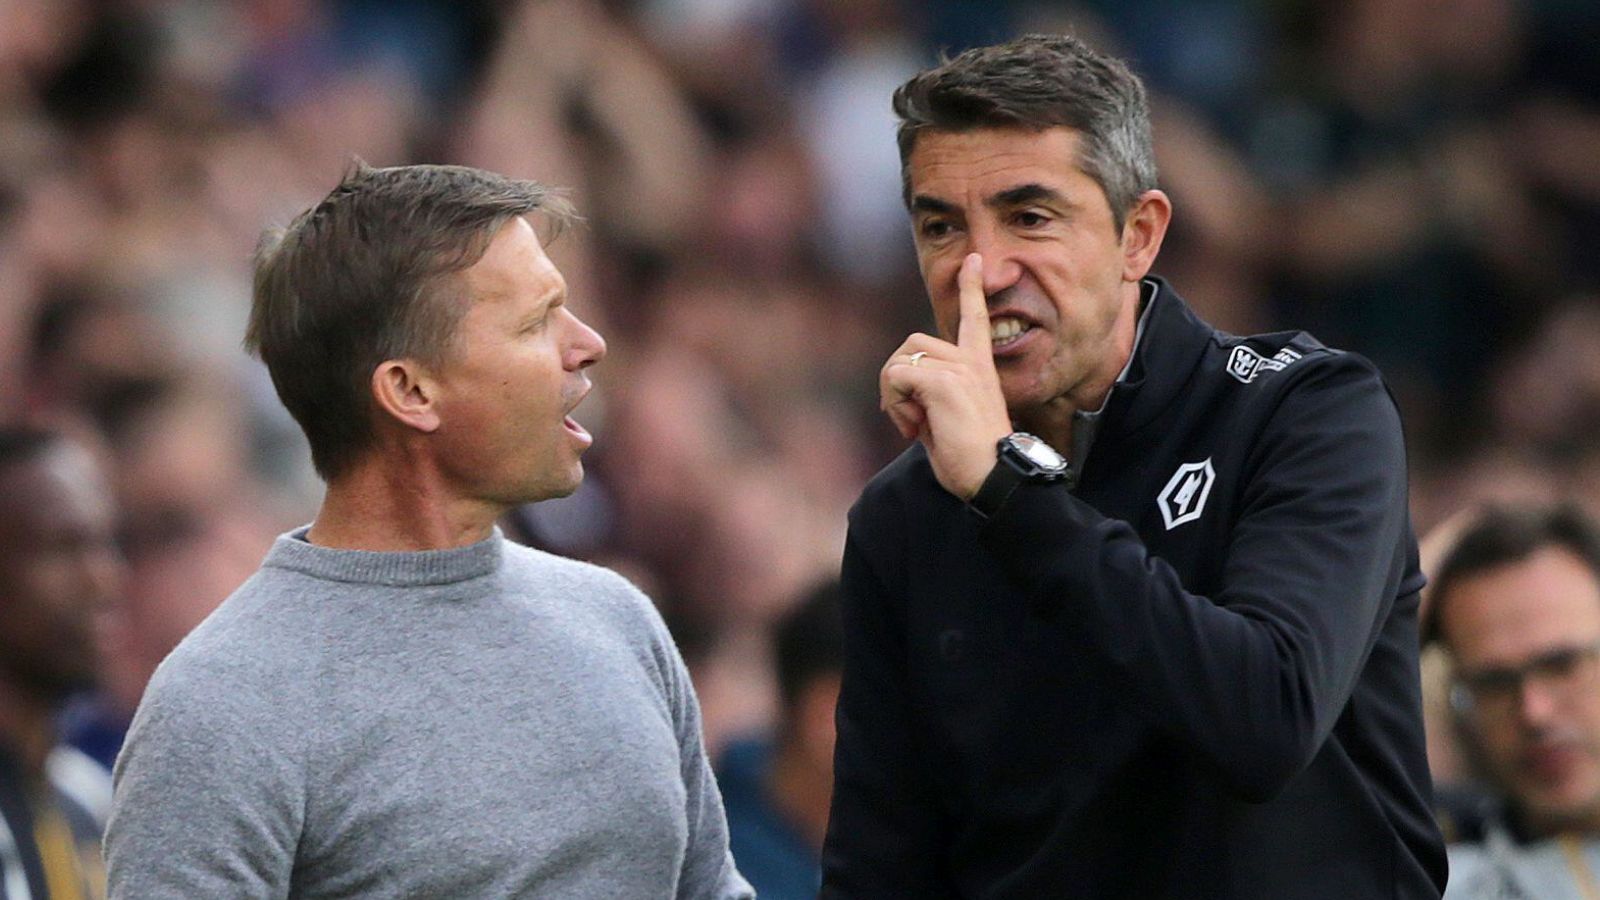 Video: Jesse Marsch and Bruno Lage clash on the touchline after 2-1 Leeds win